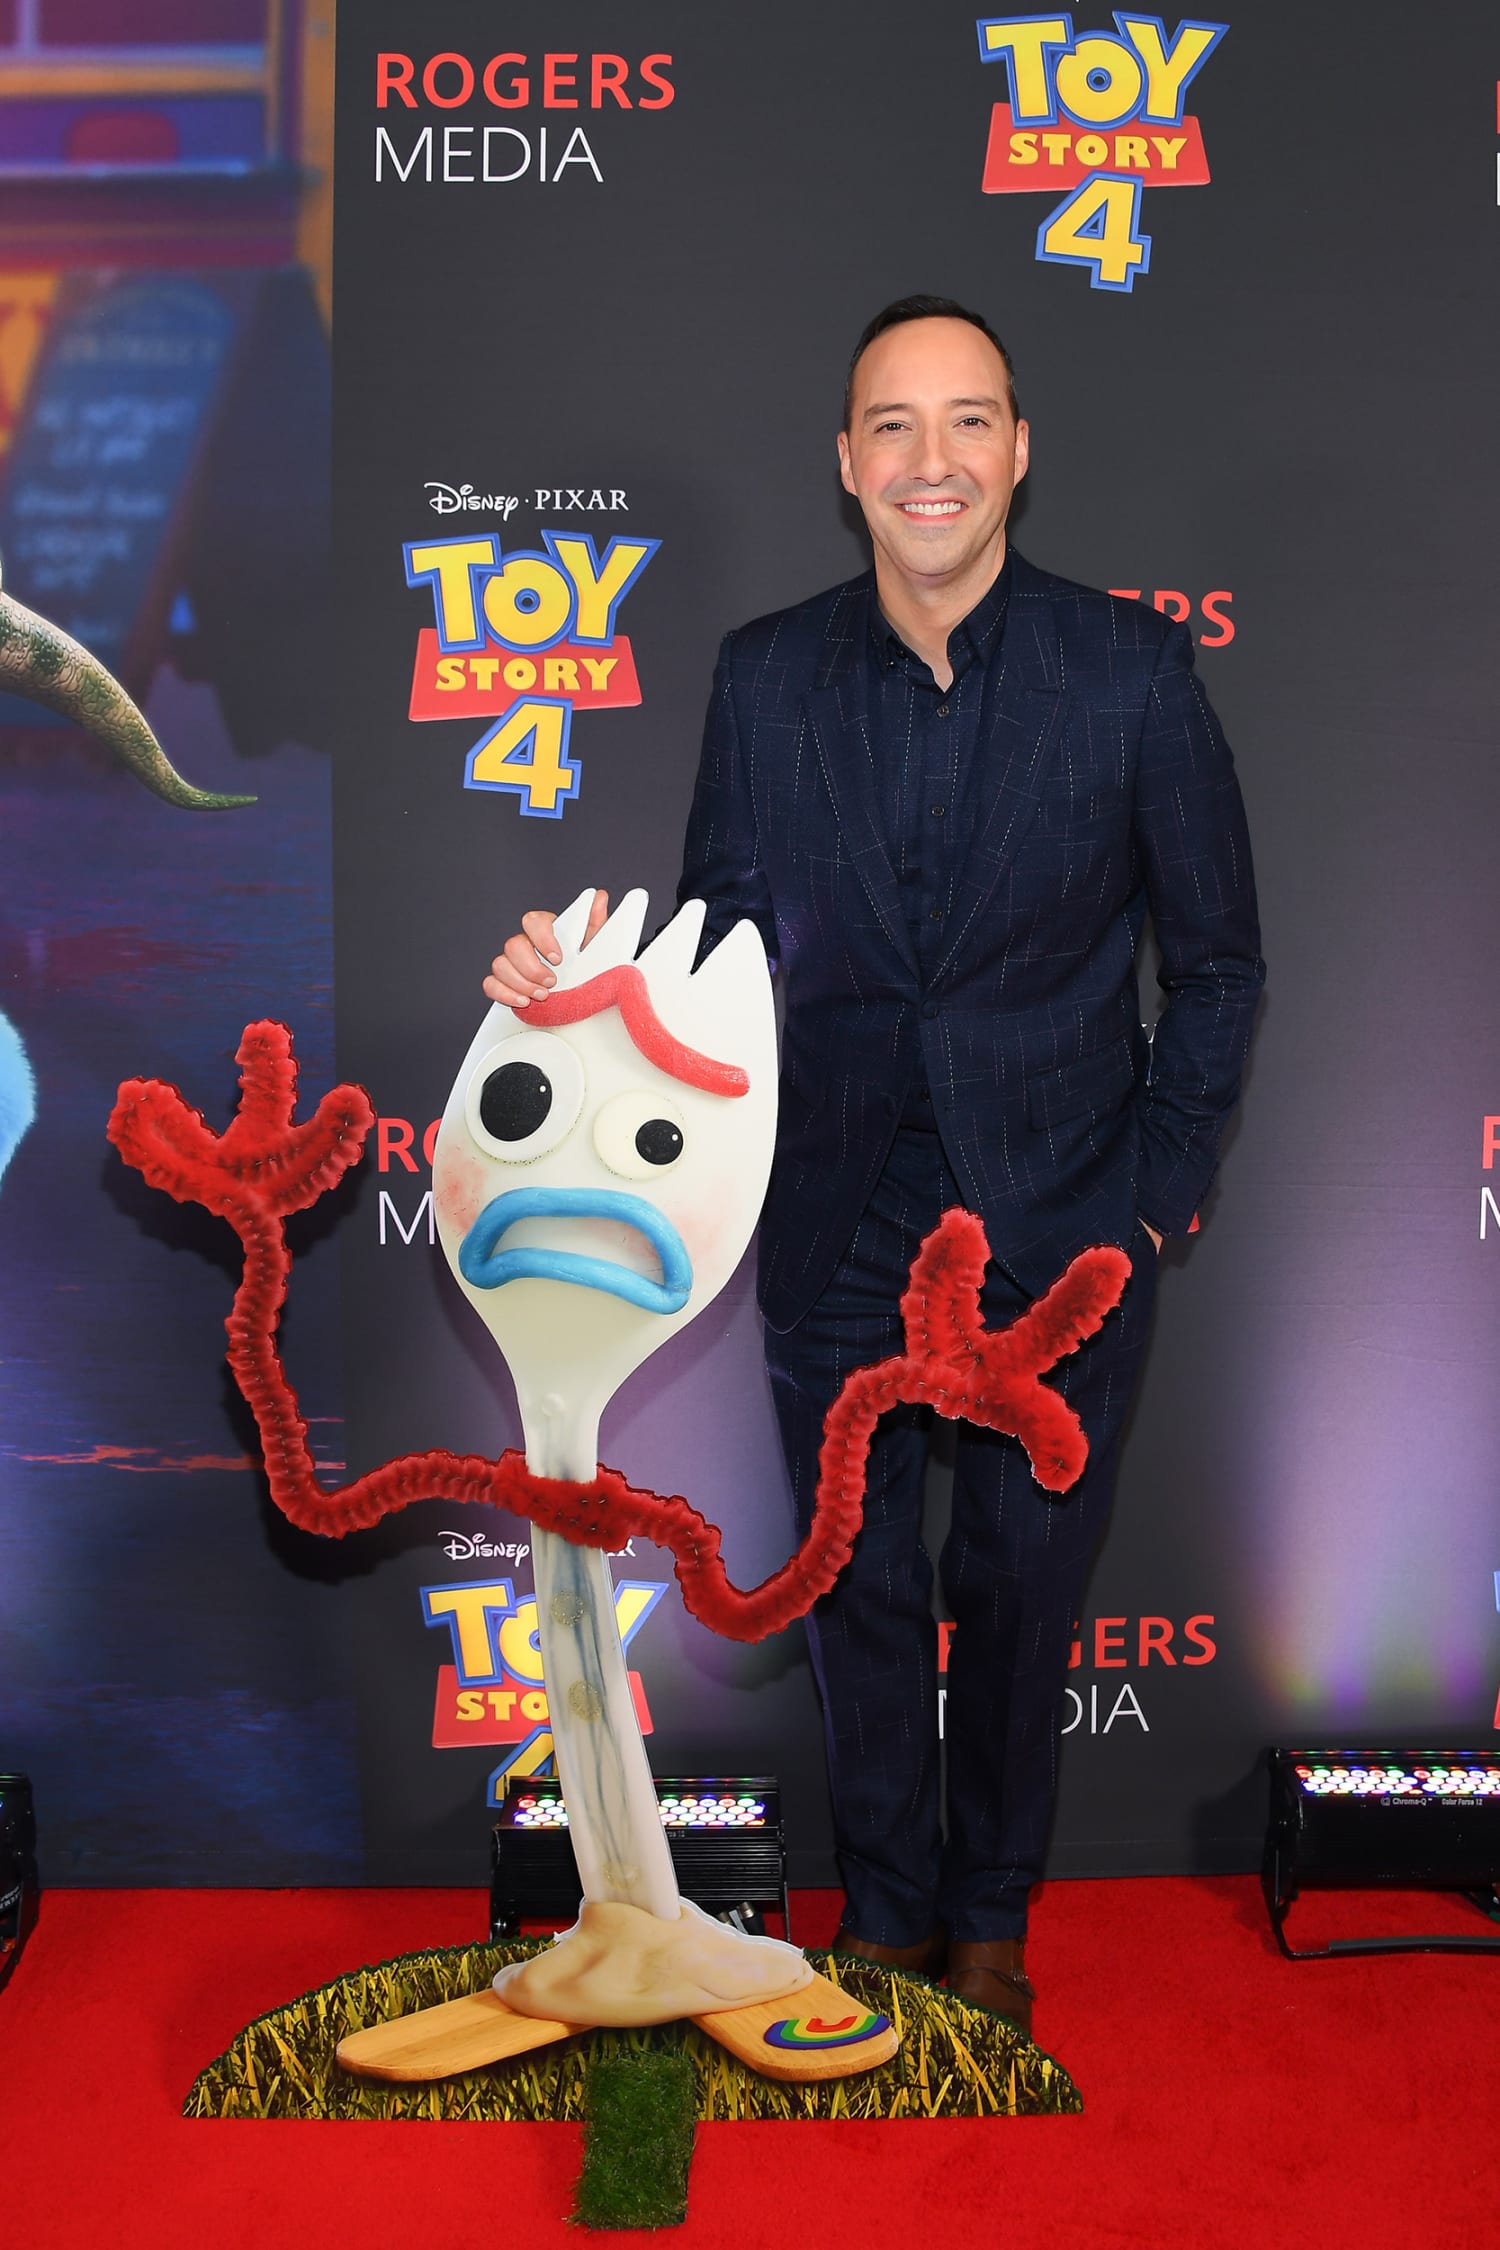 Toy Story 4' Director Reacts to People Finding Forky Relatable